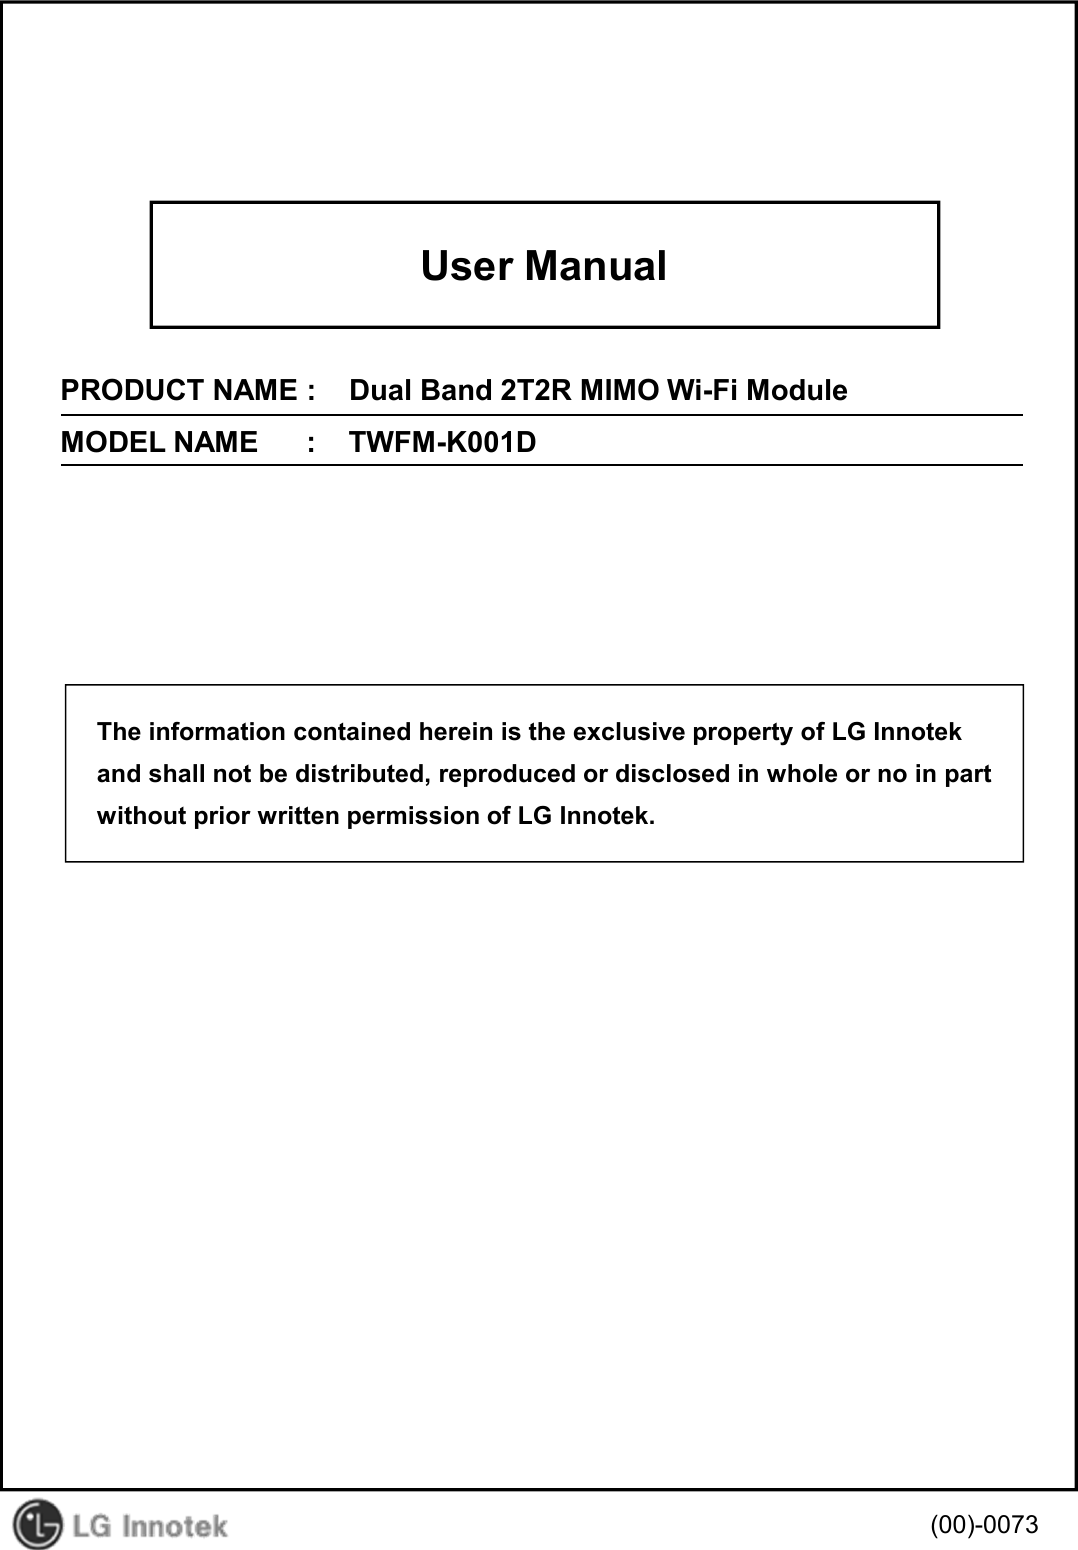 User Manual PRODUCT NAME :    Dual Band 2T2R MIMO Wi-Fi Module MODEL NAME      :    TWFM-K001D  (00)-0073 The information contained herein is the exclusive property of LG Innotek and shall not be distributed, reproduced or disclosed in whole or no in part without prior written permission of LG Innotek. 